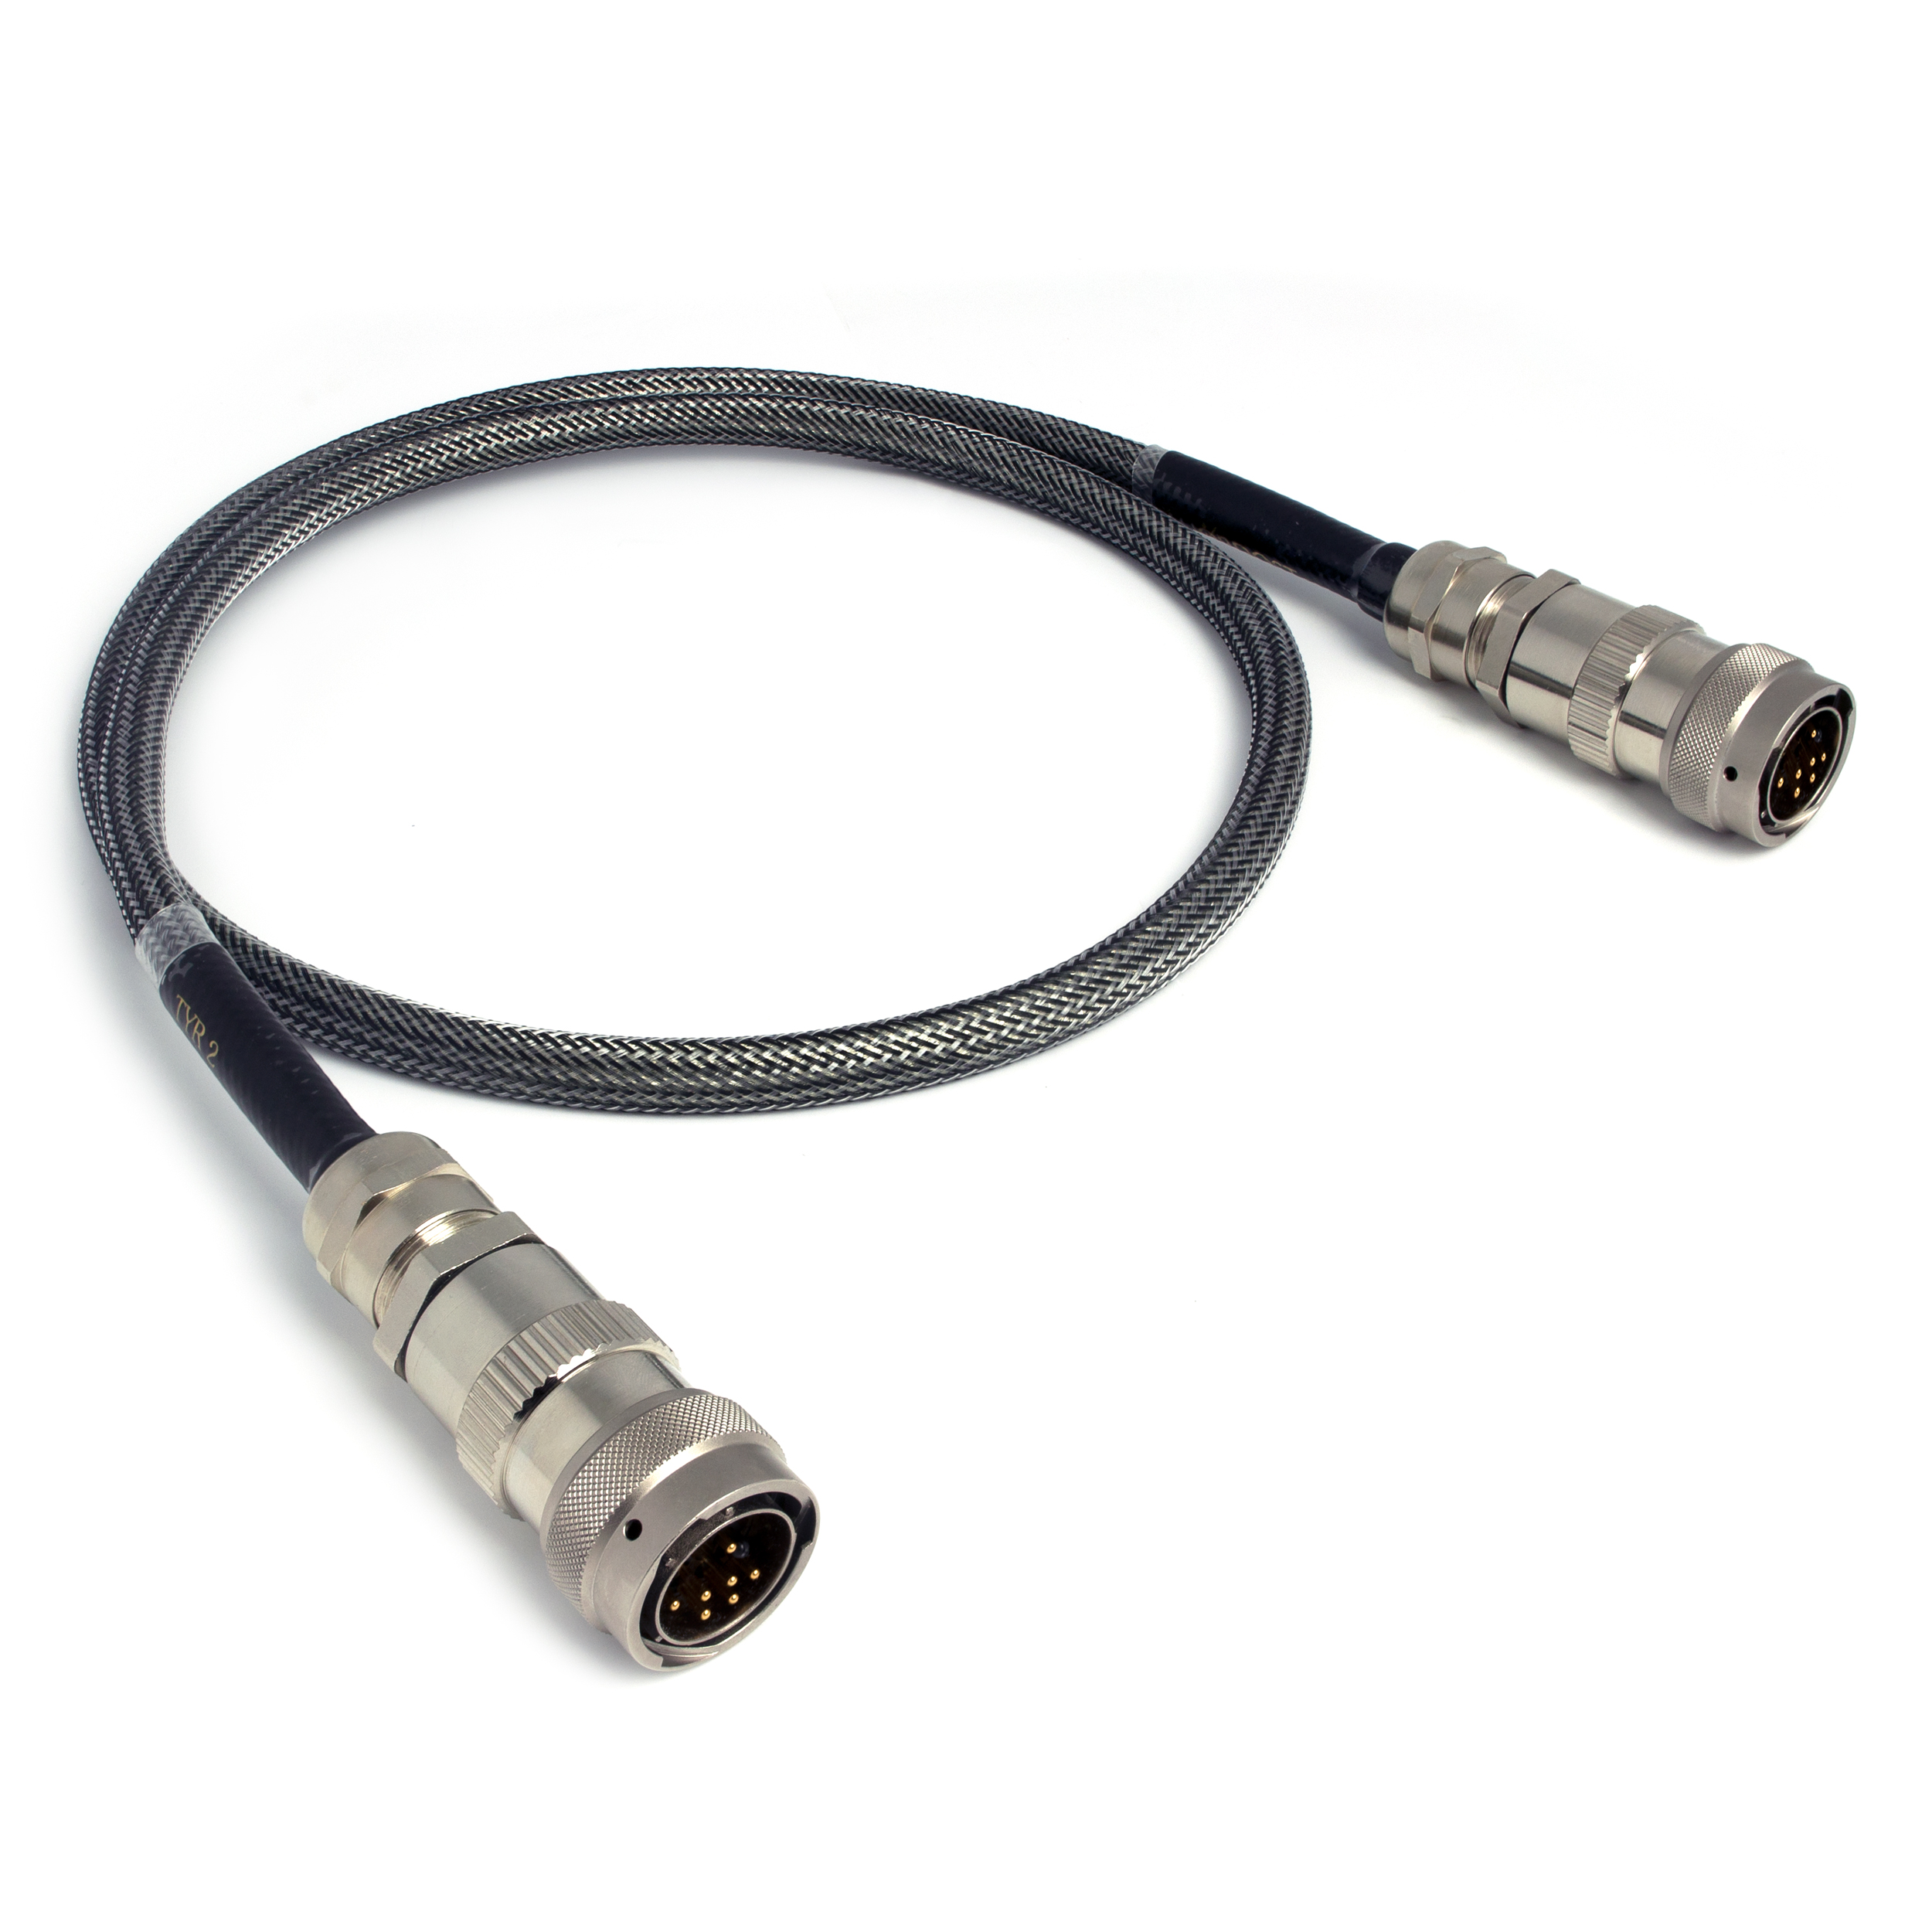 <p align="center">Tyr 2 Specialty Cable</p>